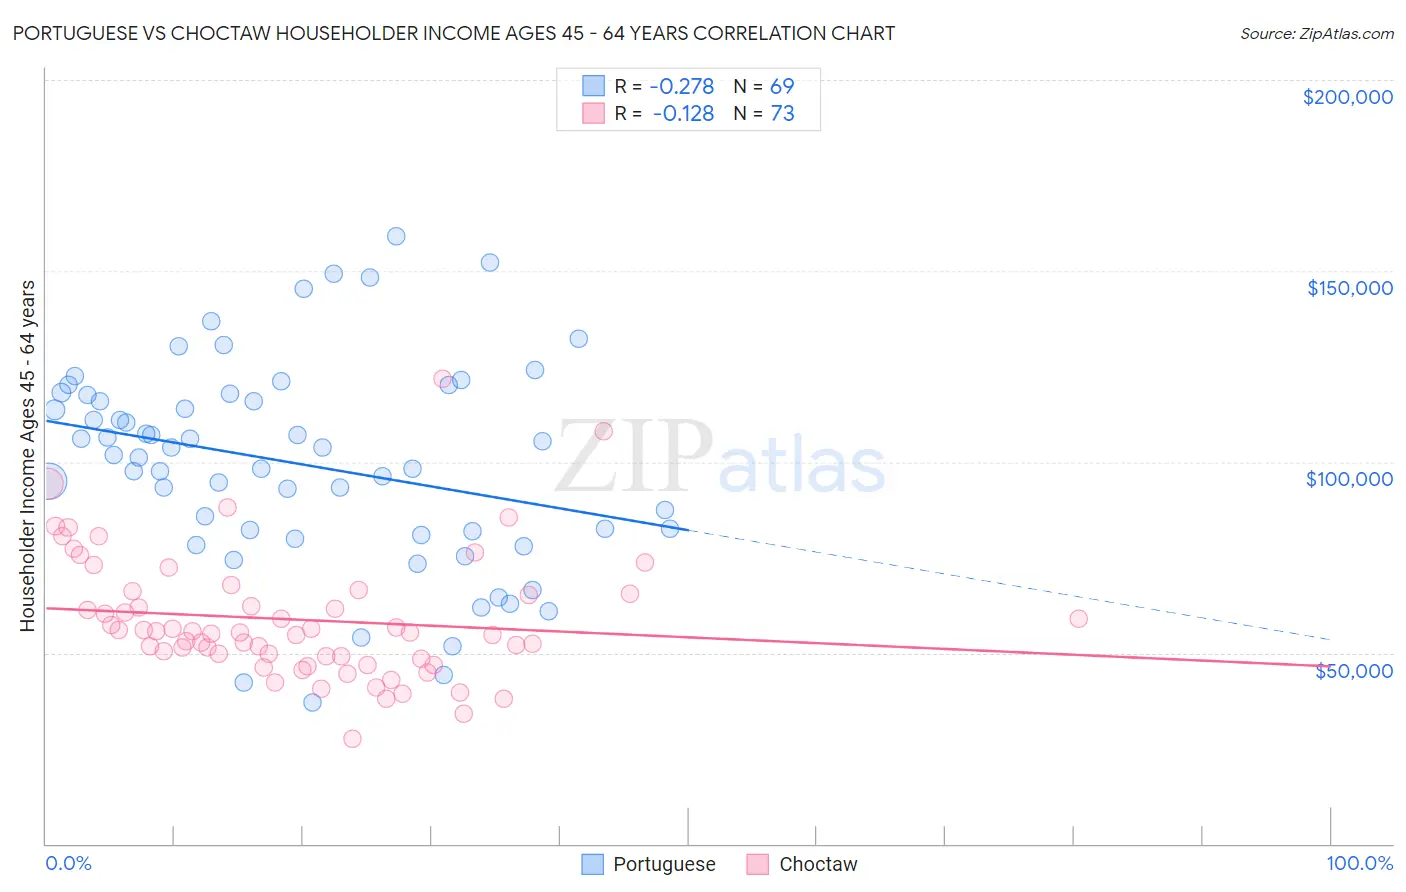 Portuguese vs Choctaw Householder Income Ages 45 - 64 years